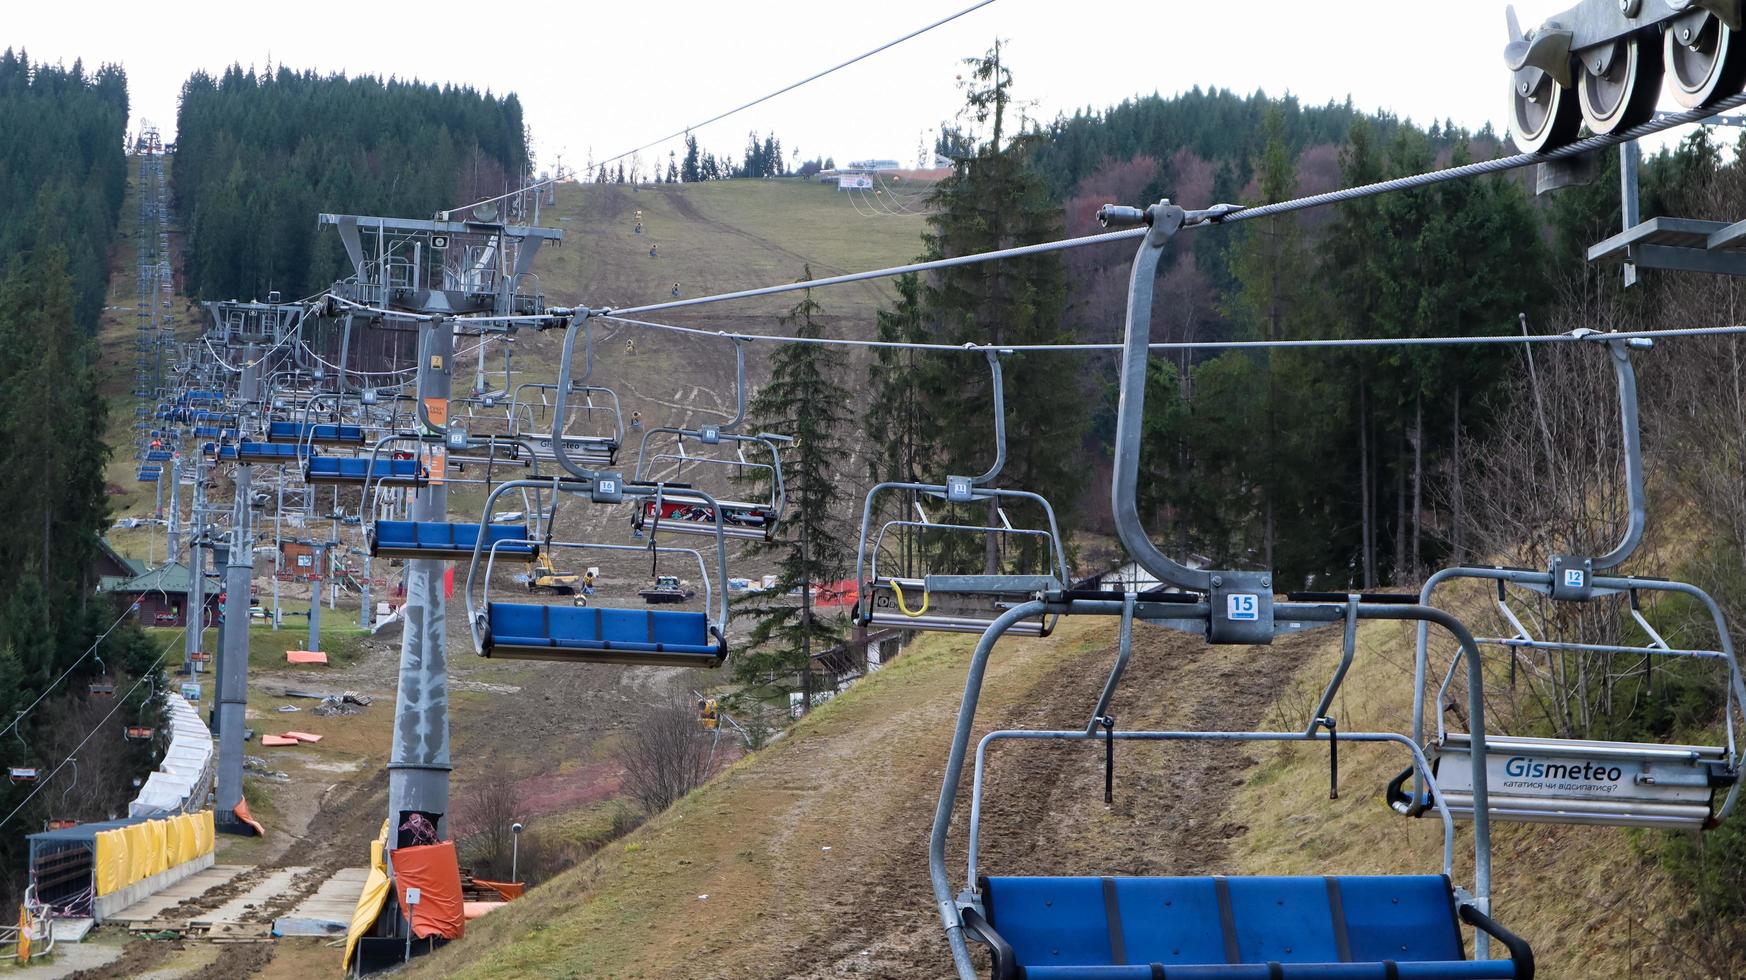 Ukraine, Bukovel - November 20, 2019. Autumn view of the ski resort with a chairlift against the background of autumn mountain slopes and the infrastructure under construction of a winter ski resort. photo